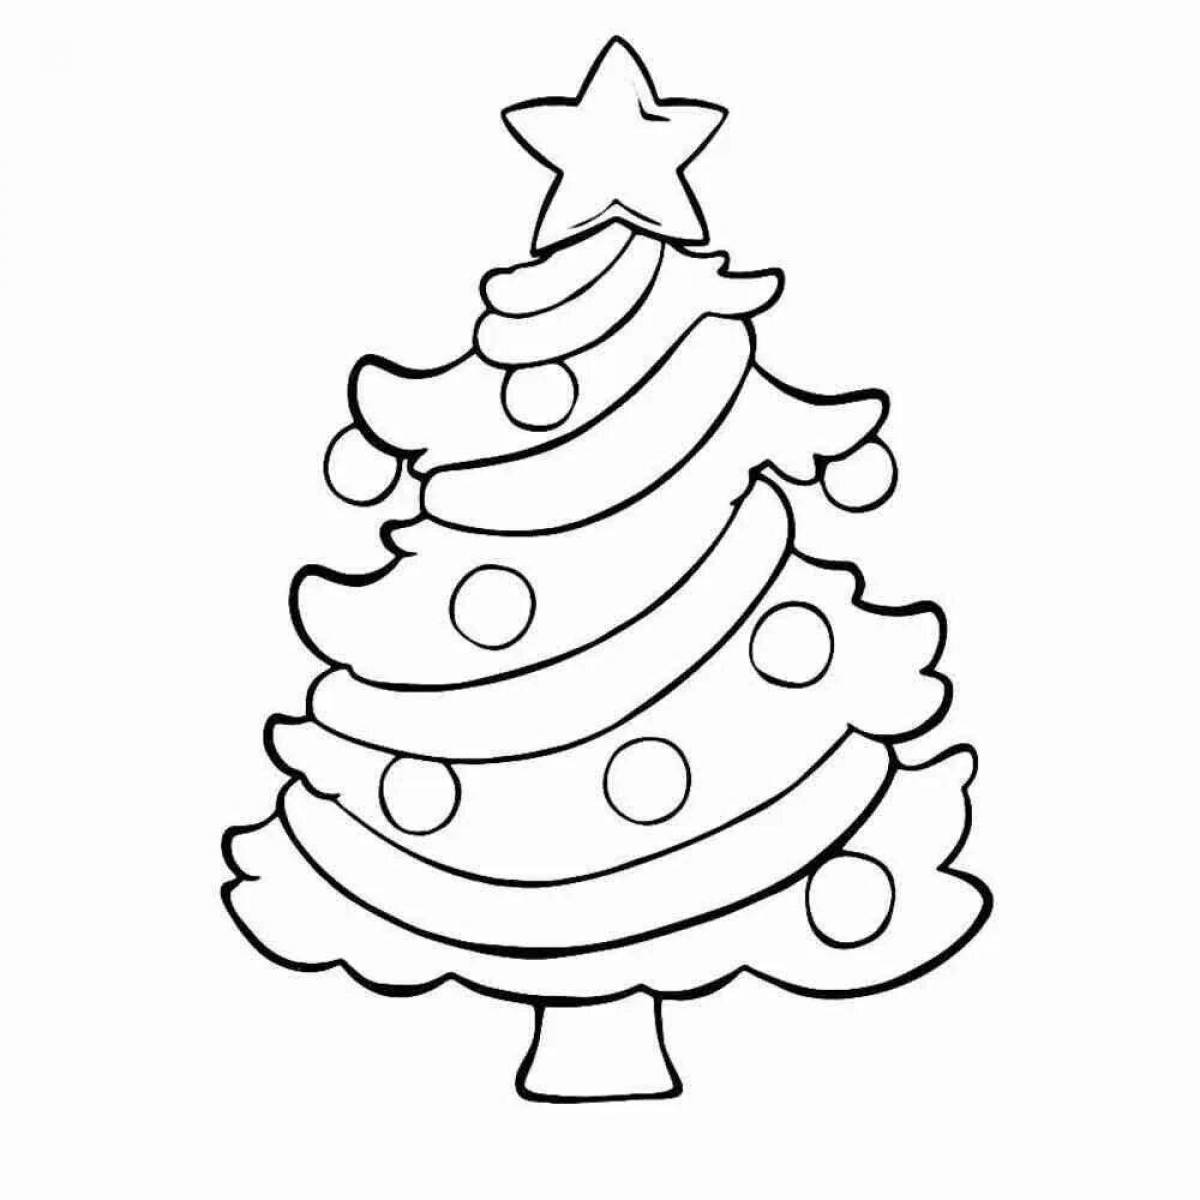 Decorated Christmas coloring book